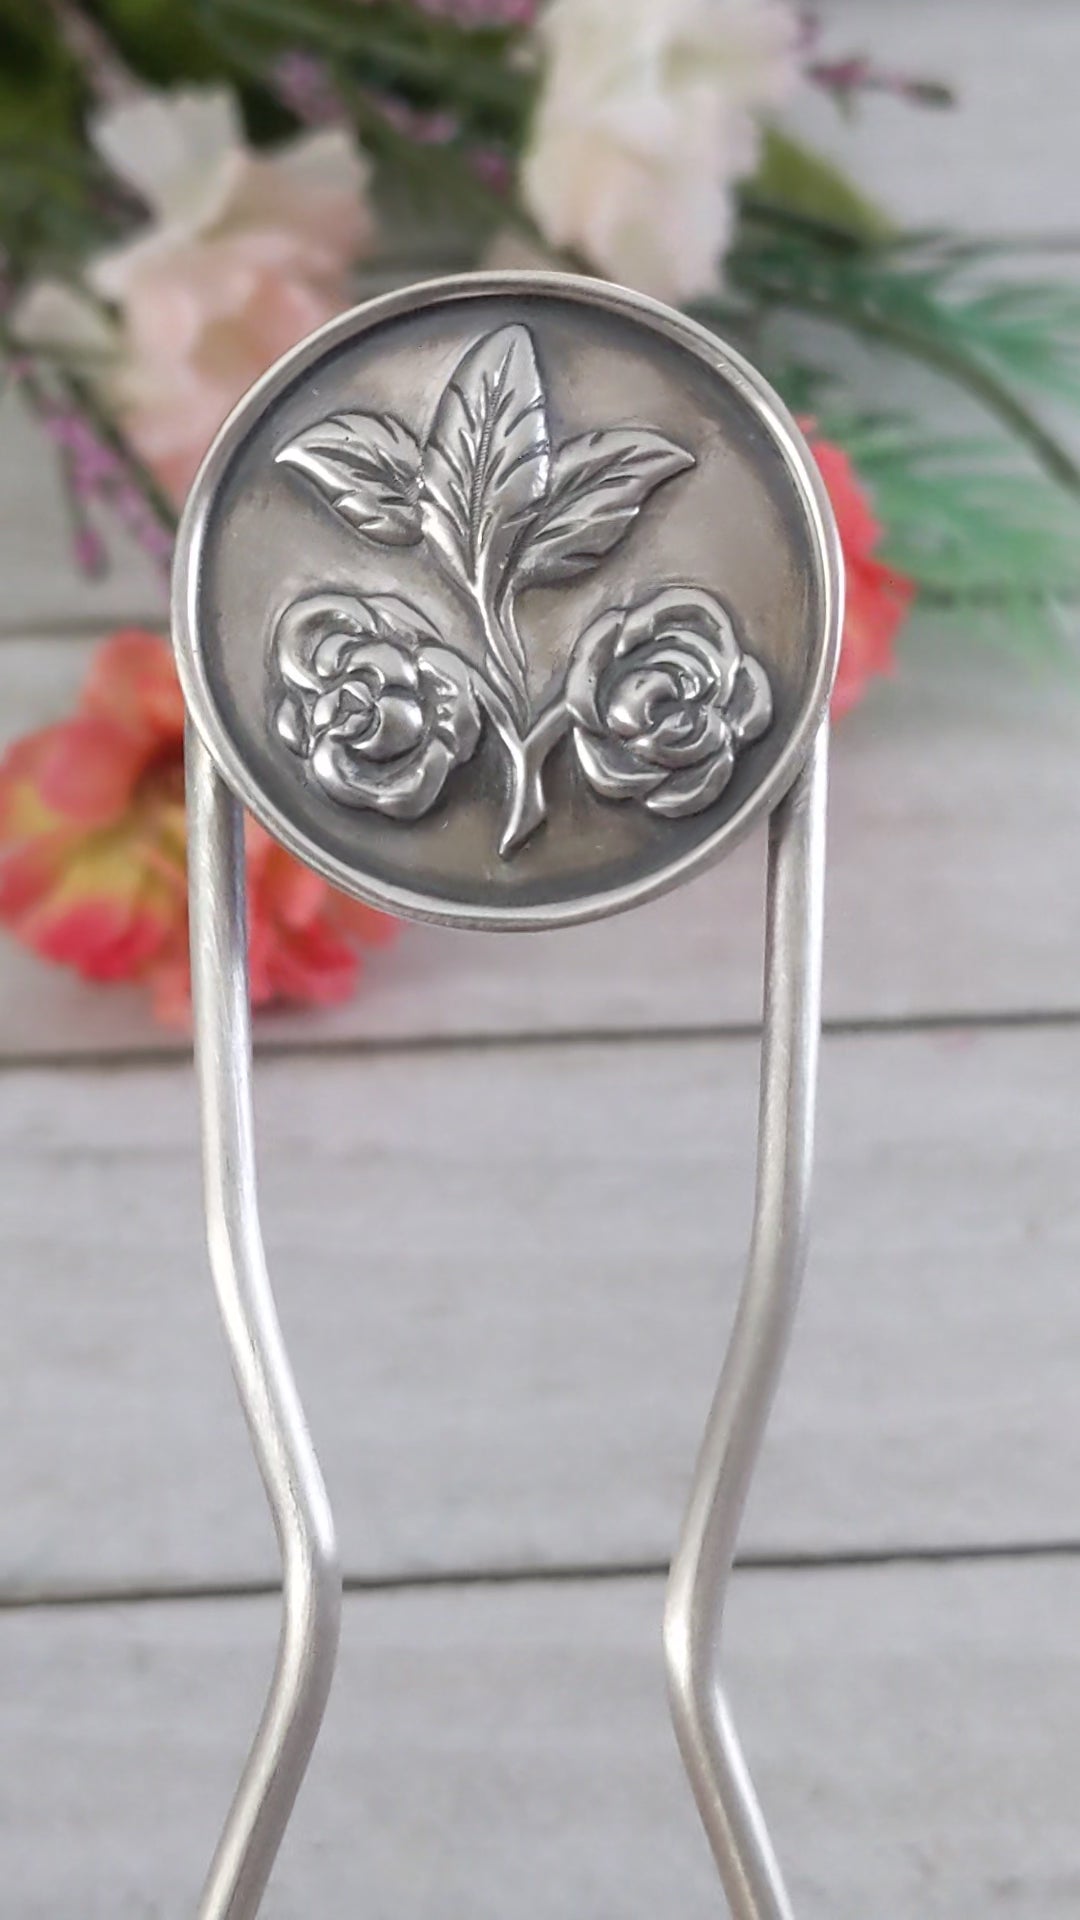 Sterling silver hair fork. Attached to top of fork is a round piece of silver with a rounded border edge. The sheet has a raised design of two roses growing off of a branch clipping and at the end of the branch there are three leaves.